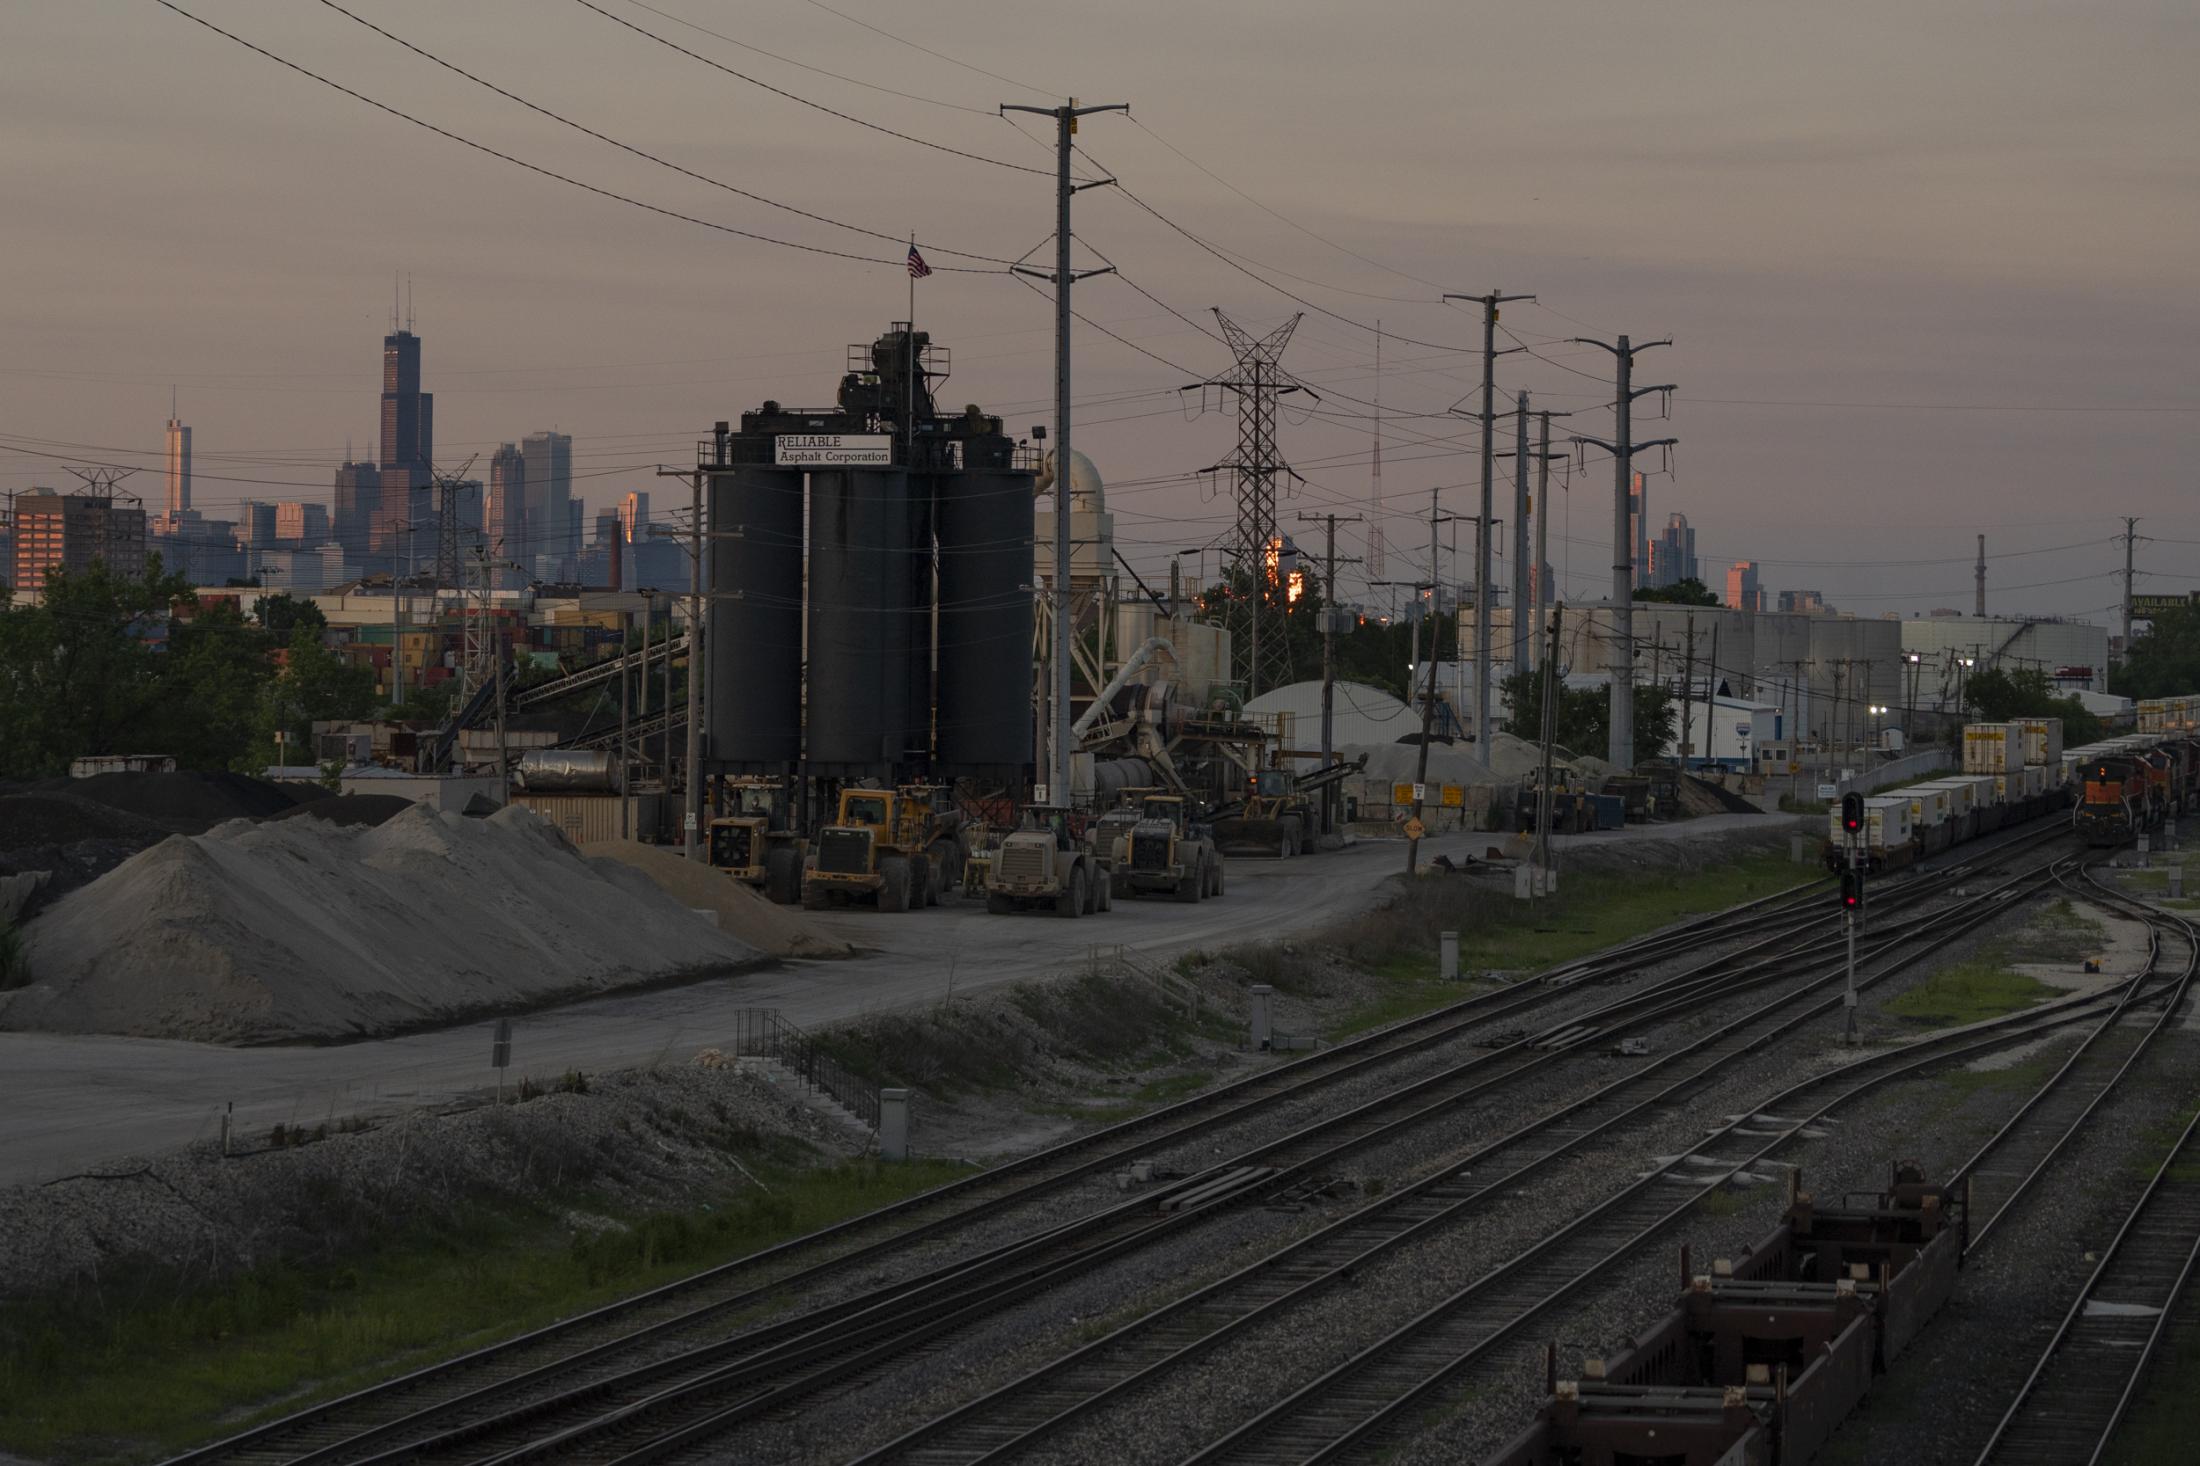 Little Village - The skyline of downtown Chicago parallels the industrial...